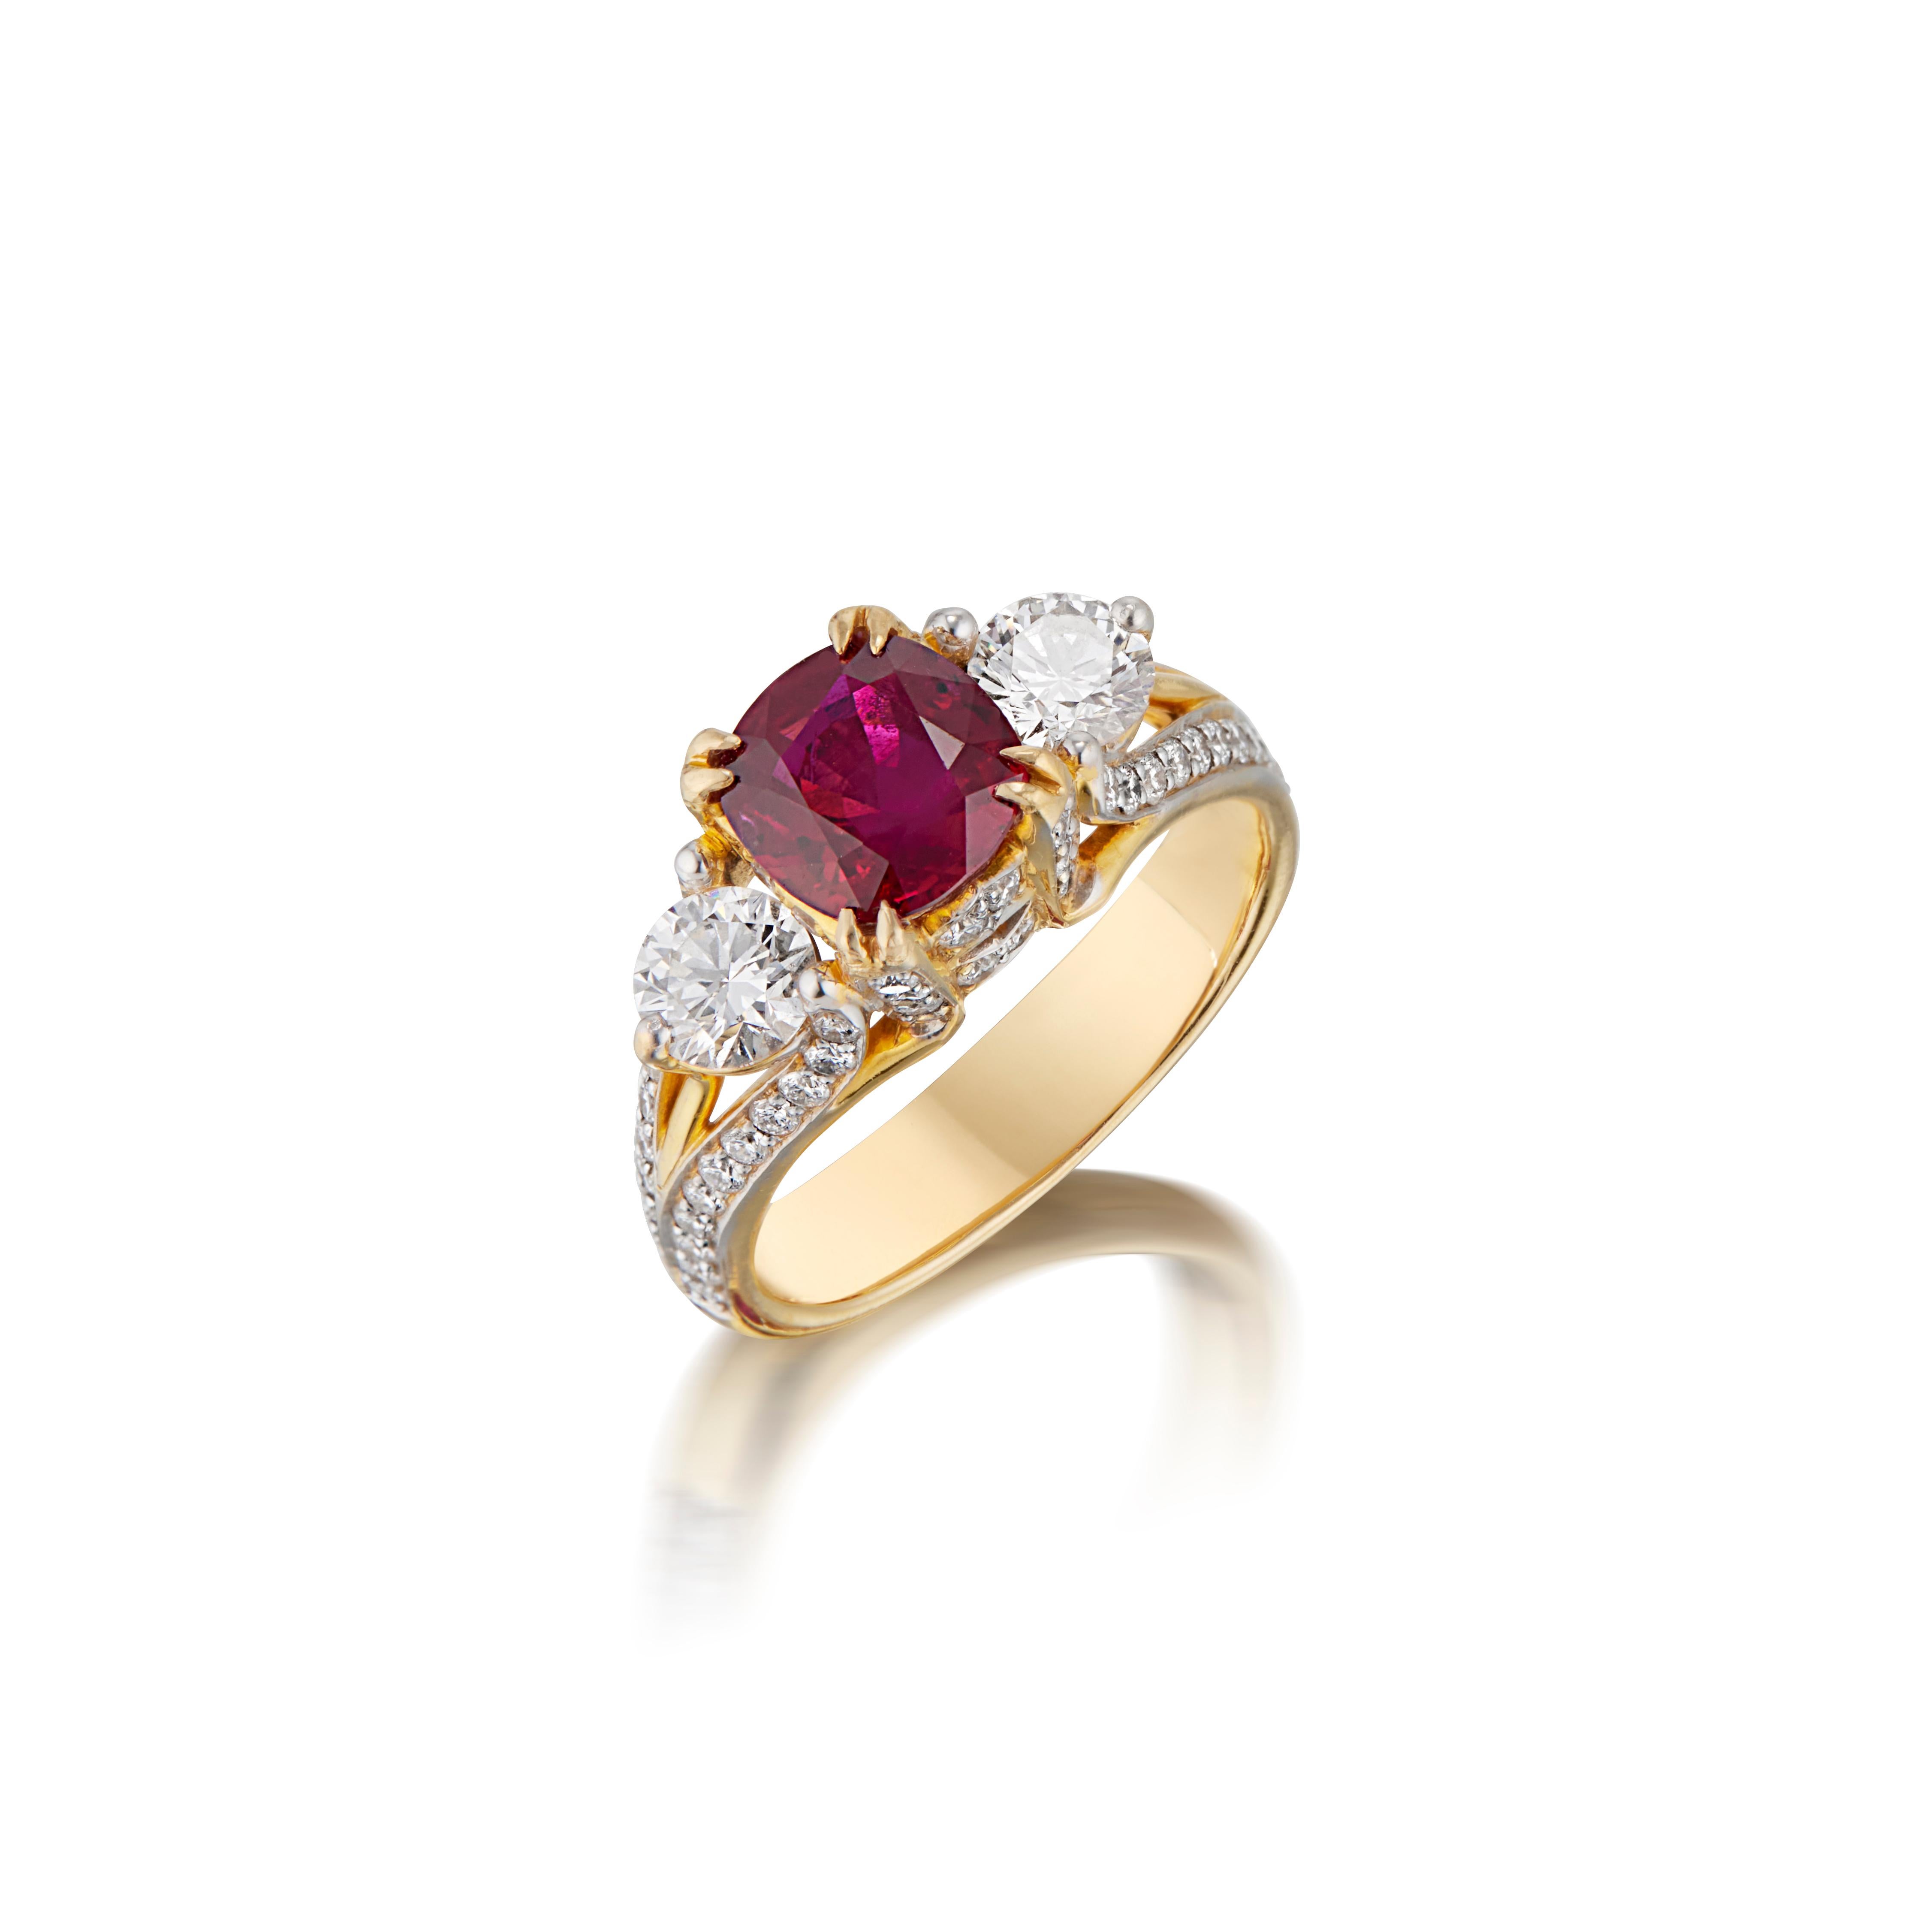 18K YELLOW GOLD 
68 DIAMONDS, 0.61CARATS
2 IF, D COLOR GIA CERTIFIED DIAMONDS, 0.74 CARATS
1 NO-HEAT PIGEON BLOOD BURMESE RUBY, 1.74 CARATS
GUBELIN LAB CERTIFIED, PIGEON BLOOD RED

Introducing our exquisite 1.74 carat Burmese Cushion Shaped Ruby